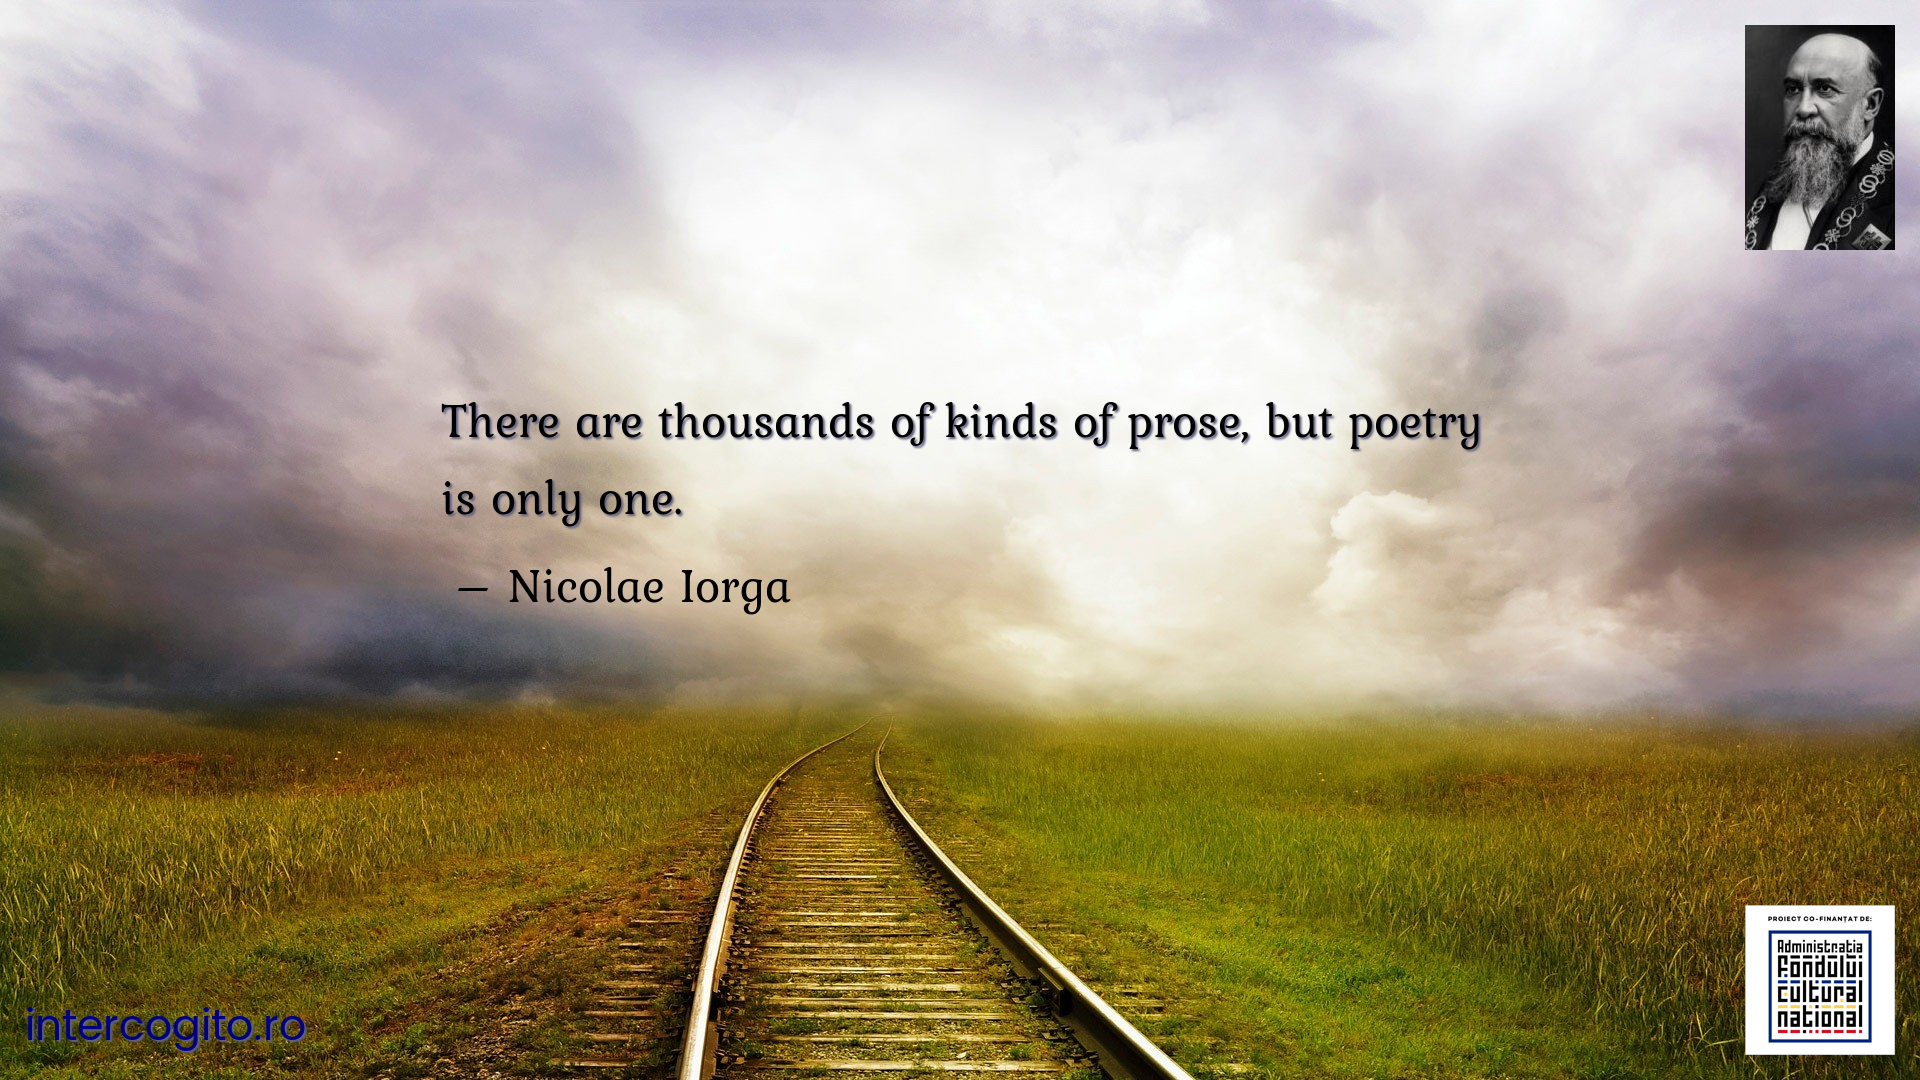 There are thousands of kinds of prose, but poetry is only one.